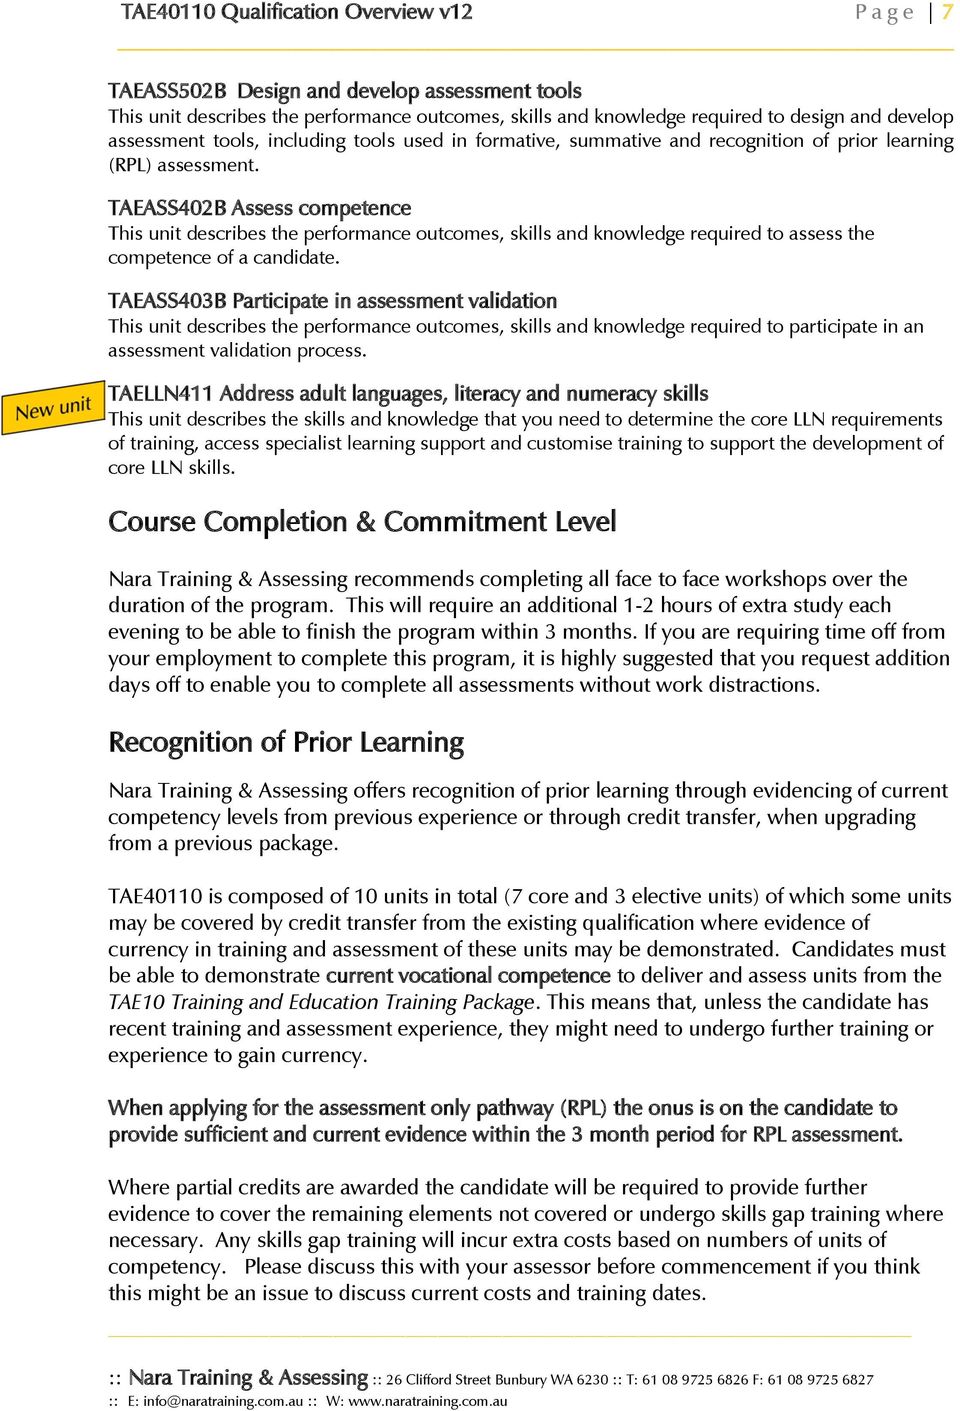 TAEASS402B Assess competence This unit describes the performance outcomes, skills and knowledge required to assess the competence of a candidate.